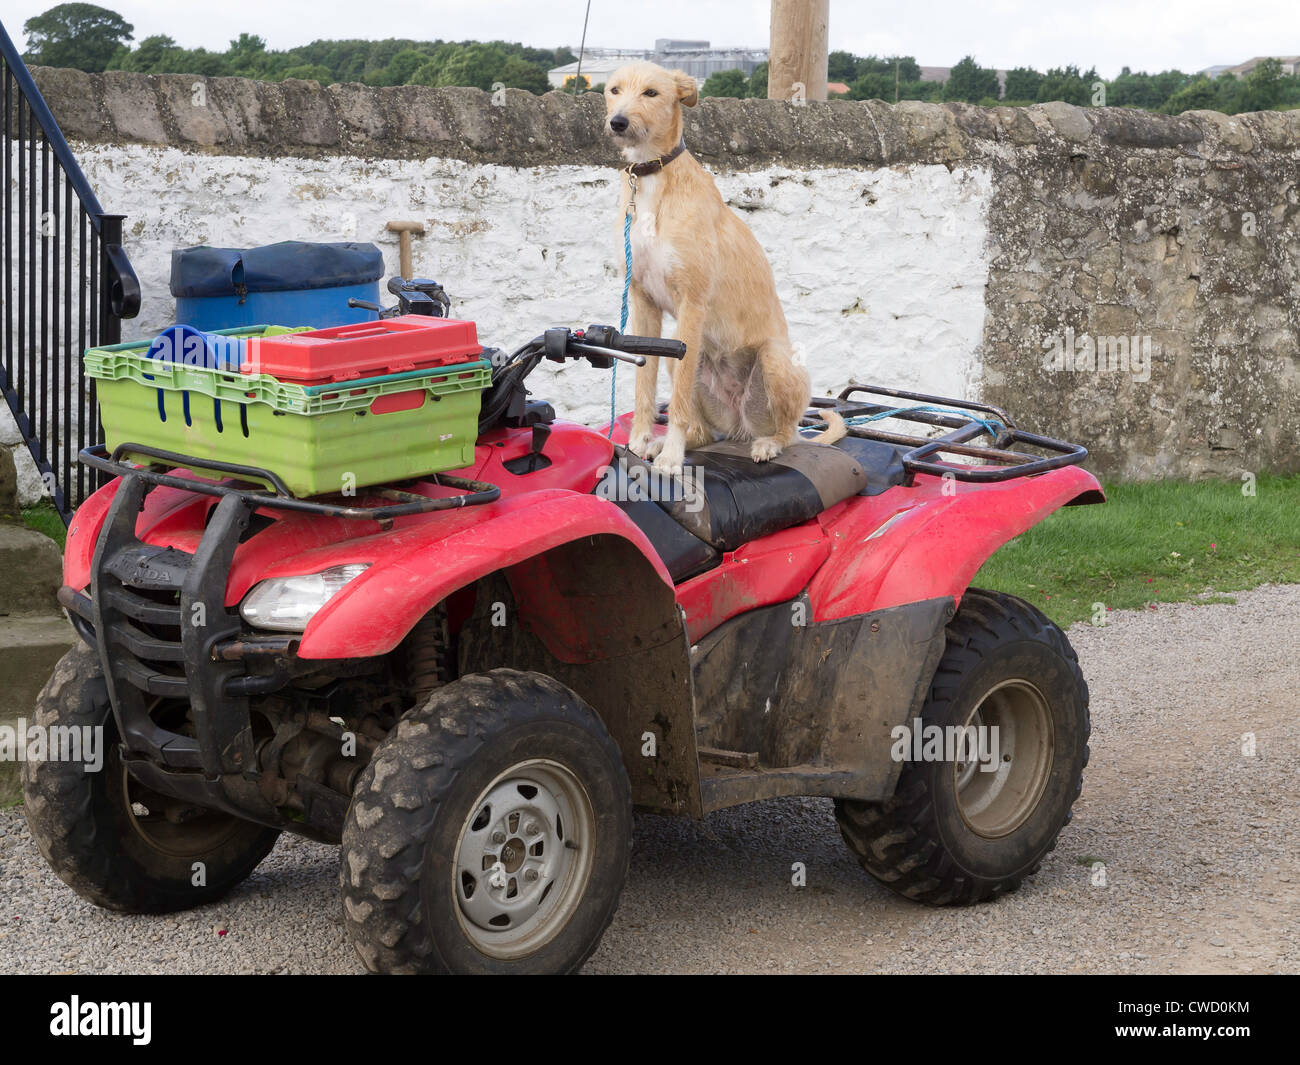 Farmers dog a fawn lurcher on a quadbike waiting for his master's return Stock Photo